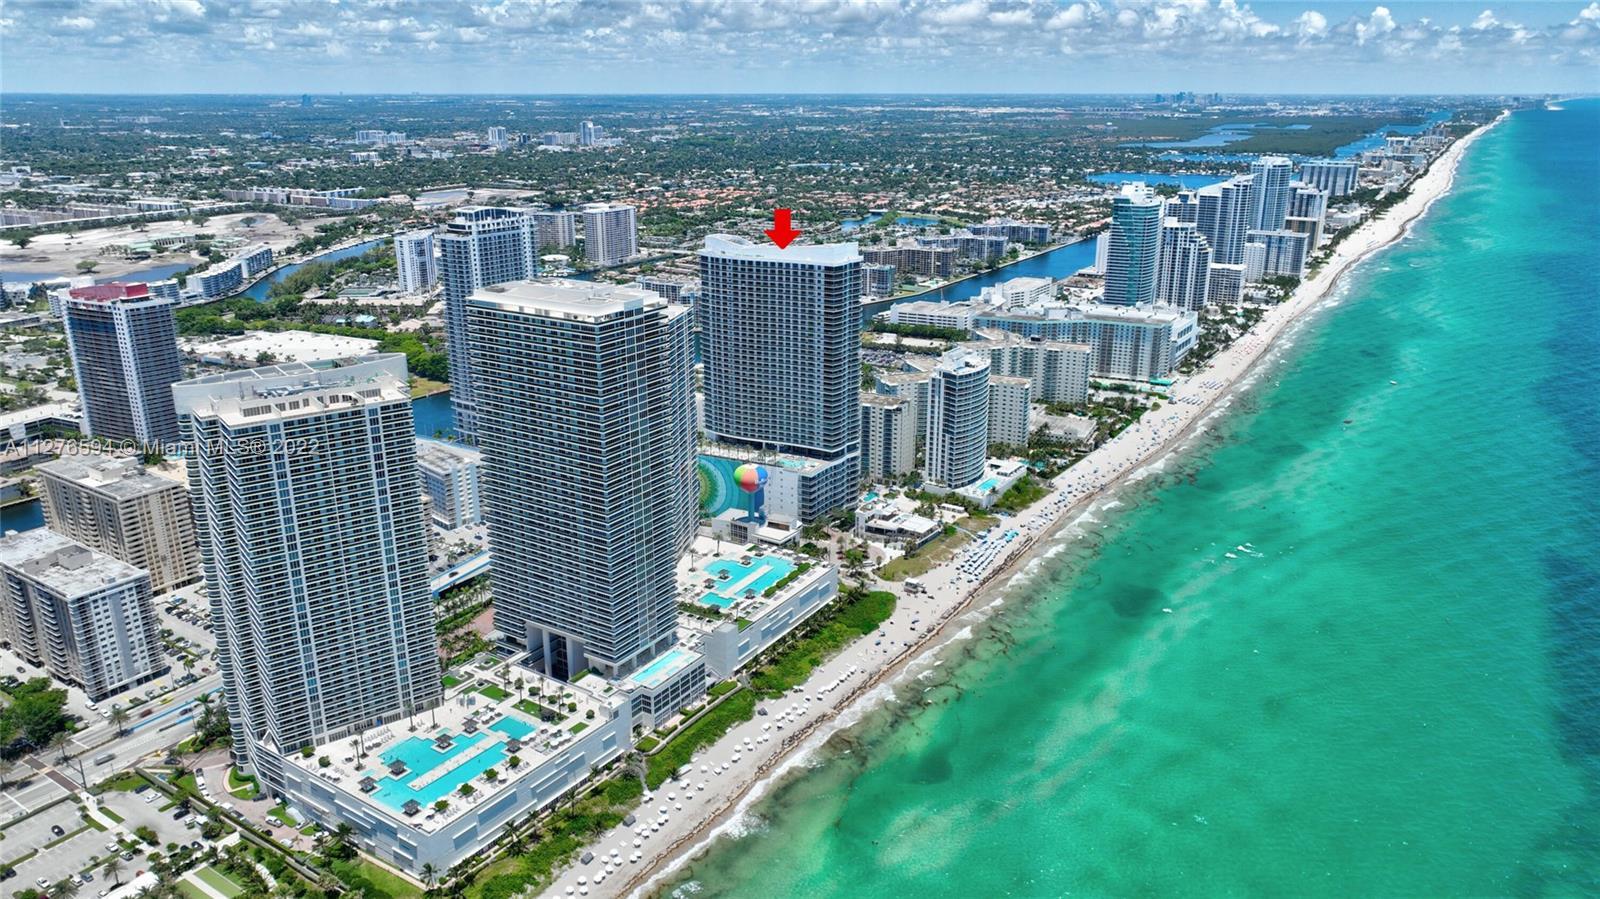 Breathtaking luxury high-rise beachfront resort! Ocean and Intracoastal views from this brand new 1 